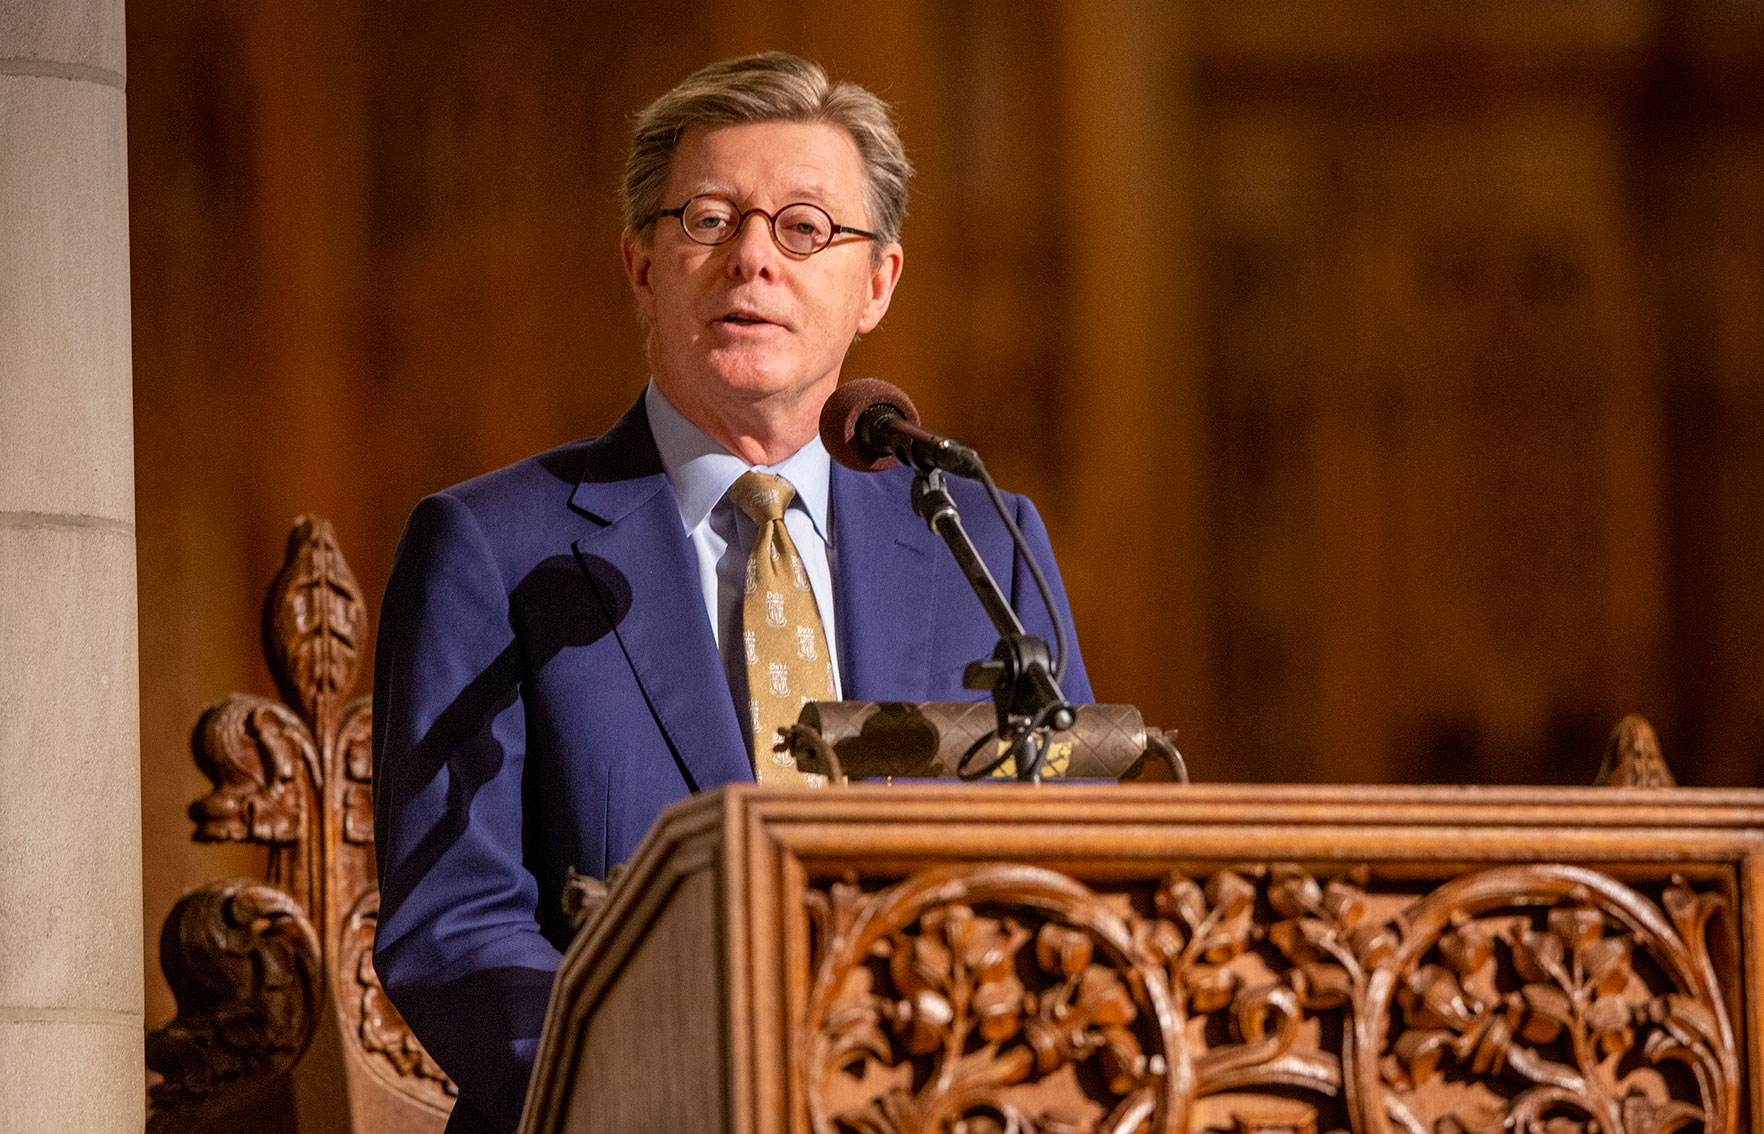 At the King Commemoration, President Vincent Price reviewed both the challenges and progress in promoting racial equity at Duke and in the country. Photo by Jared Lazarus. 